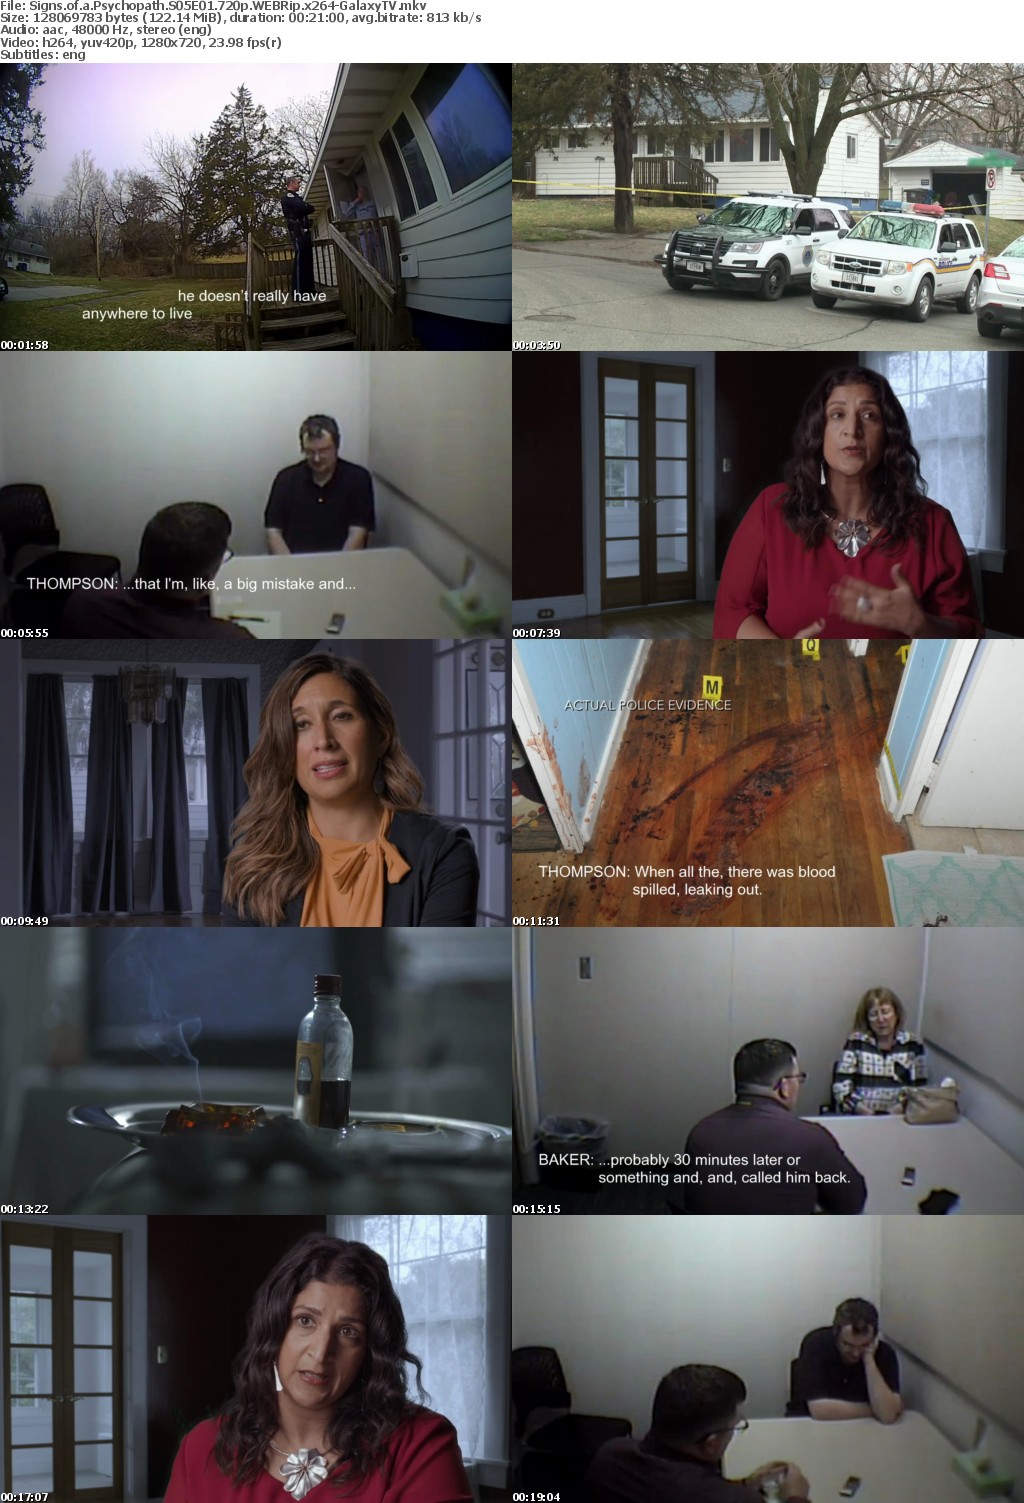 Signs of a Psychopath S05 COMPLETE 720p WEBRip x264-GalaxyTV